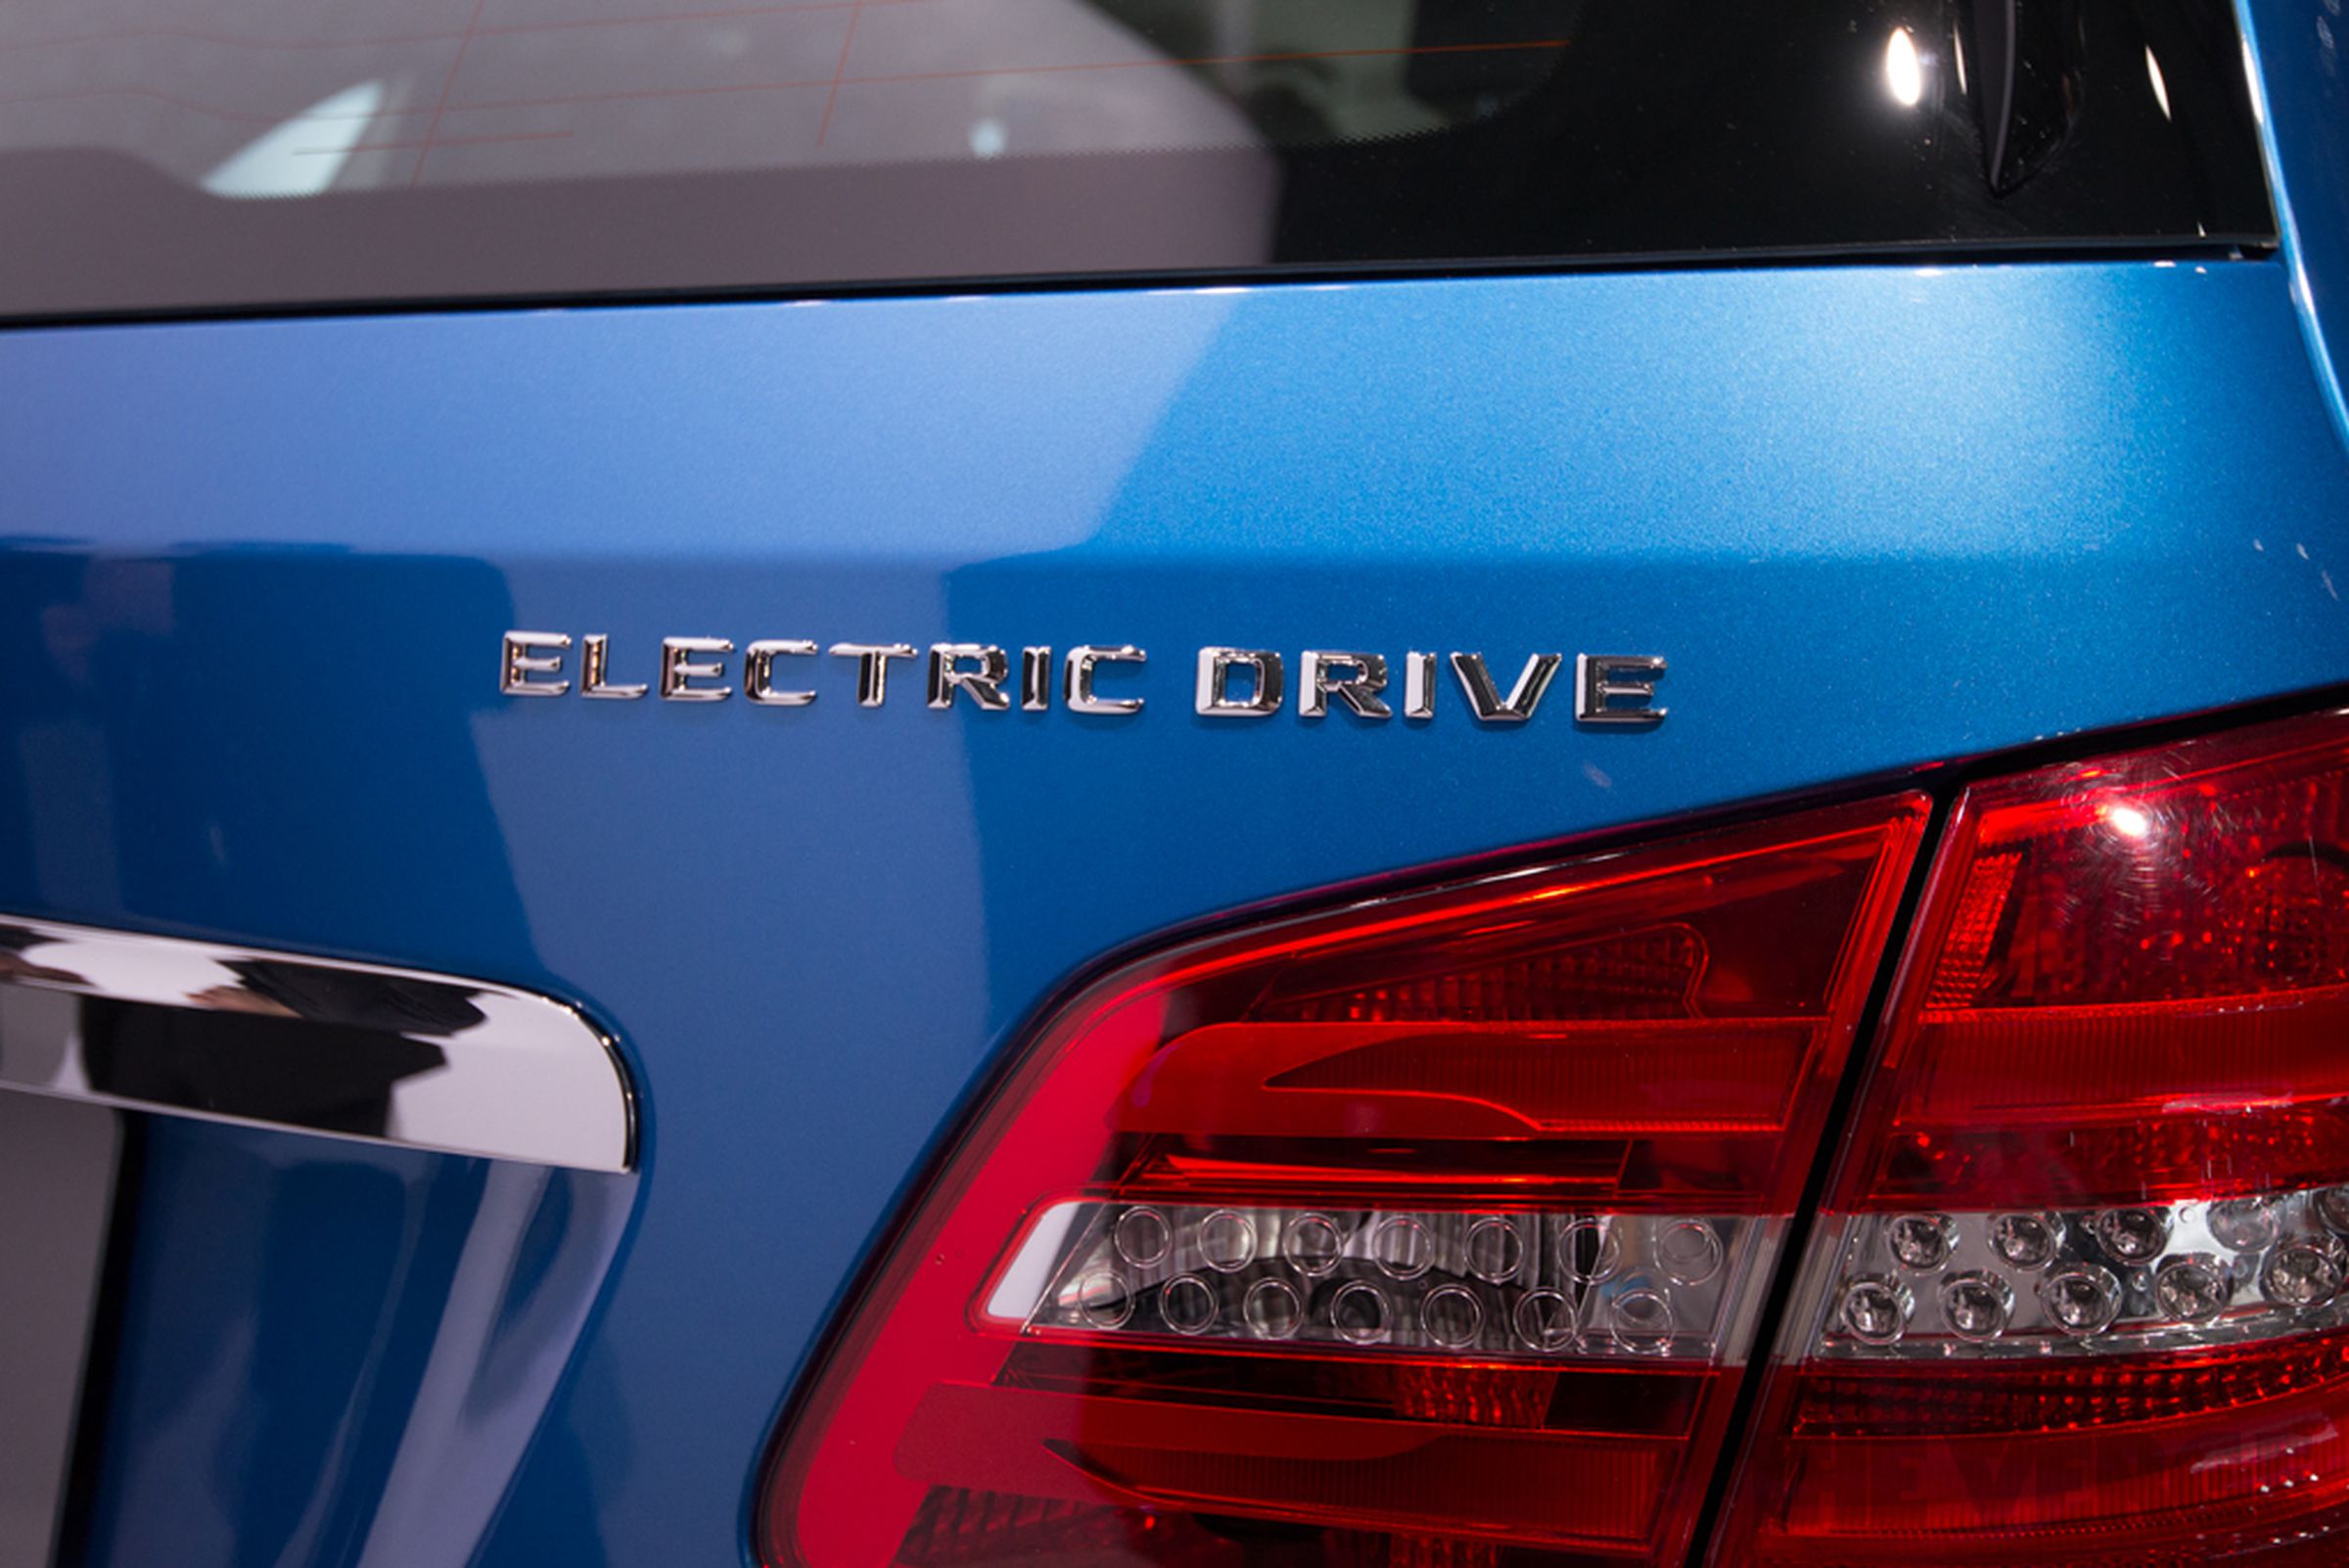 Mercedes B-Class Electric Drive hands-on pictures